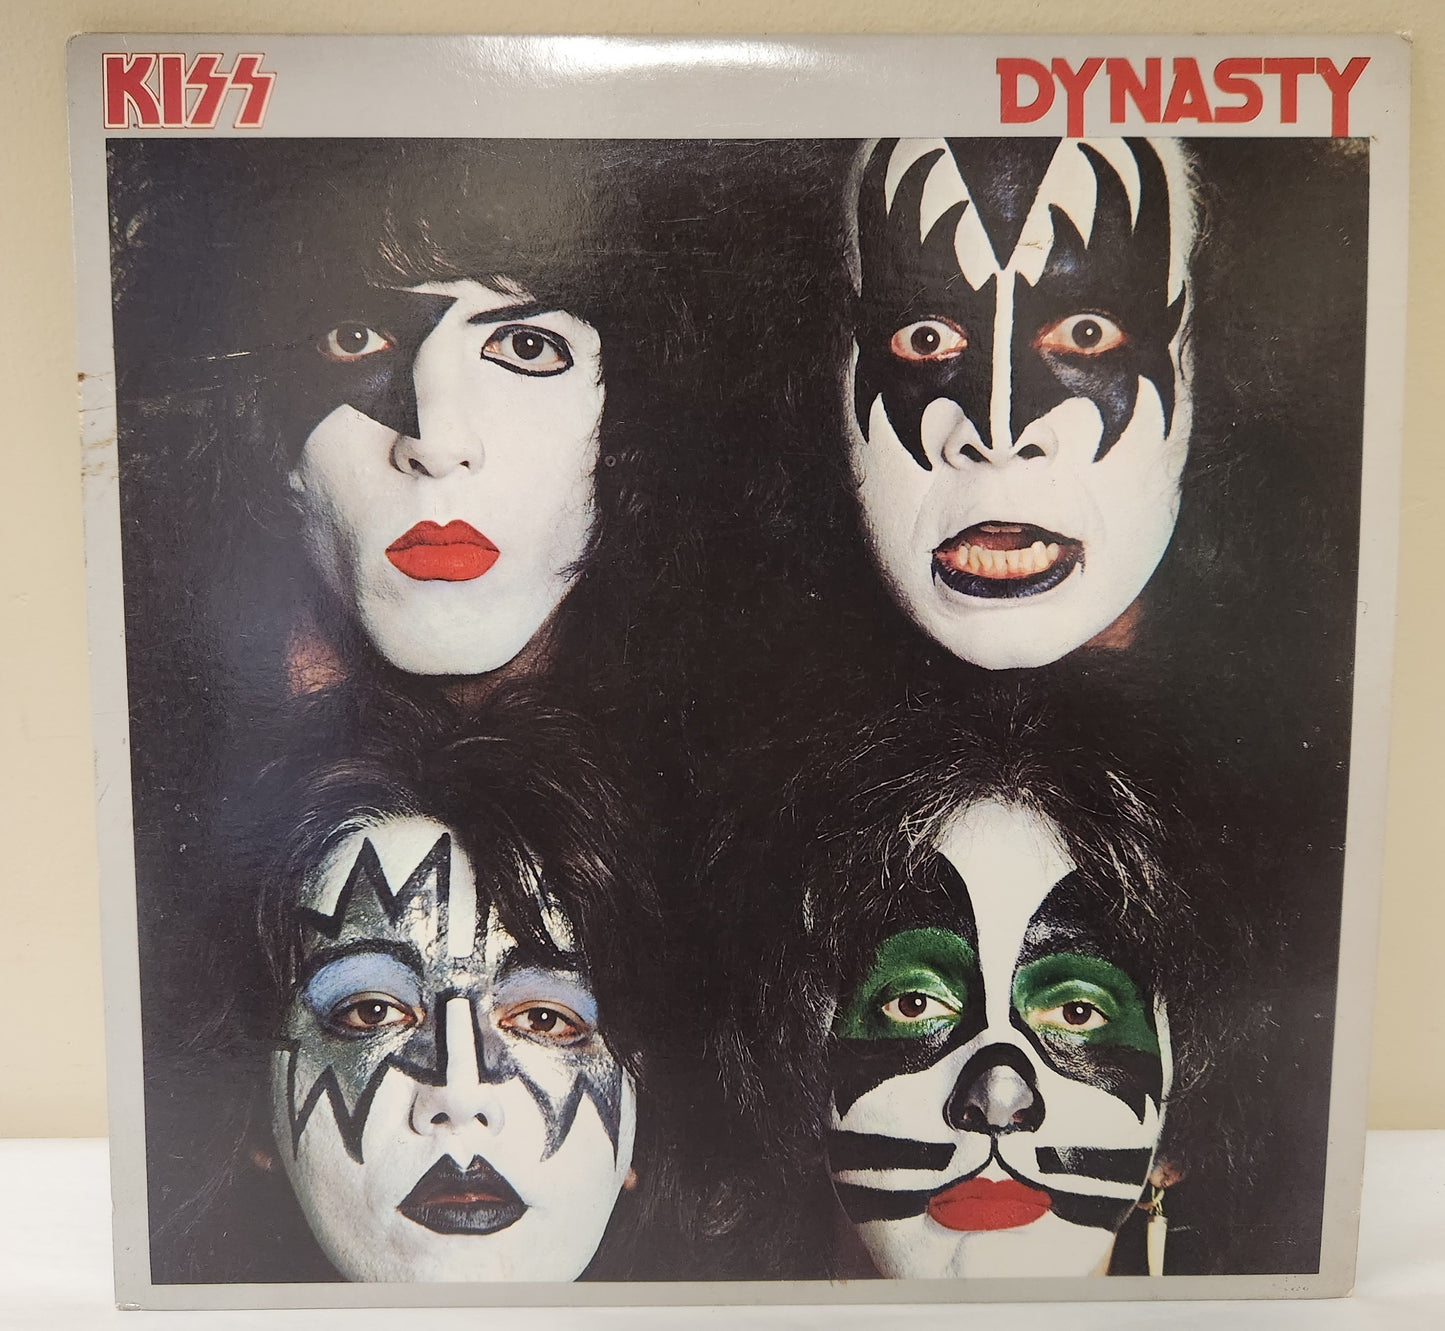 KISS "Dynasty" 1979 Hard Rock Glam Record Album with Poster